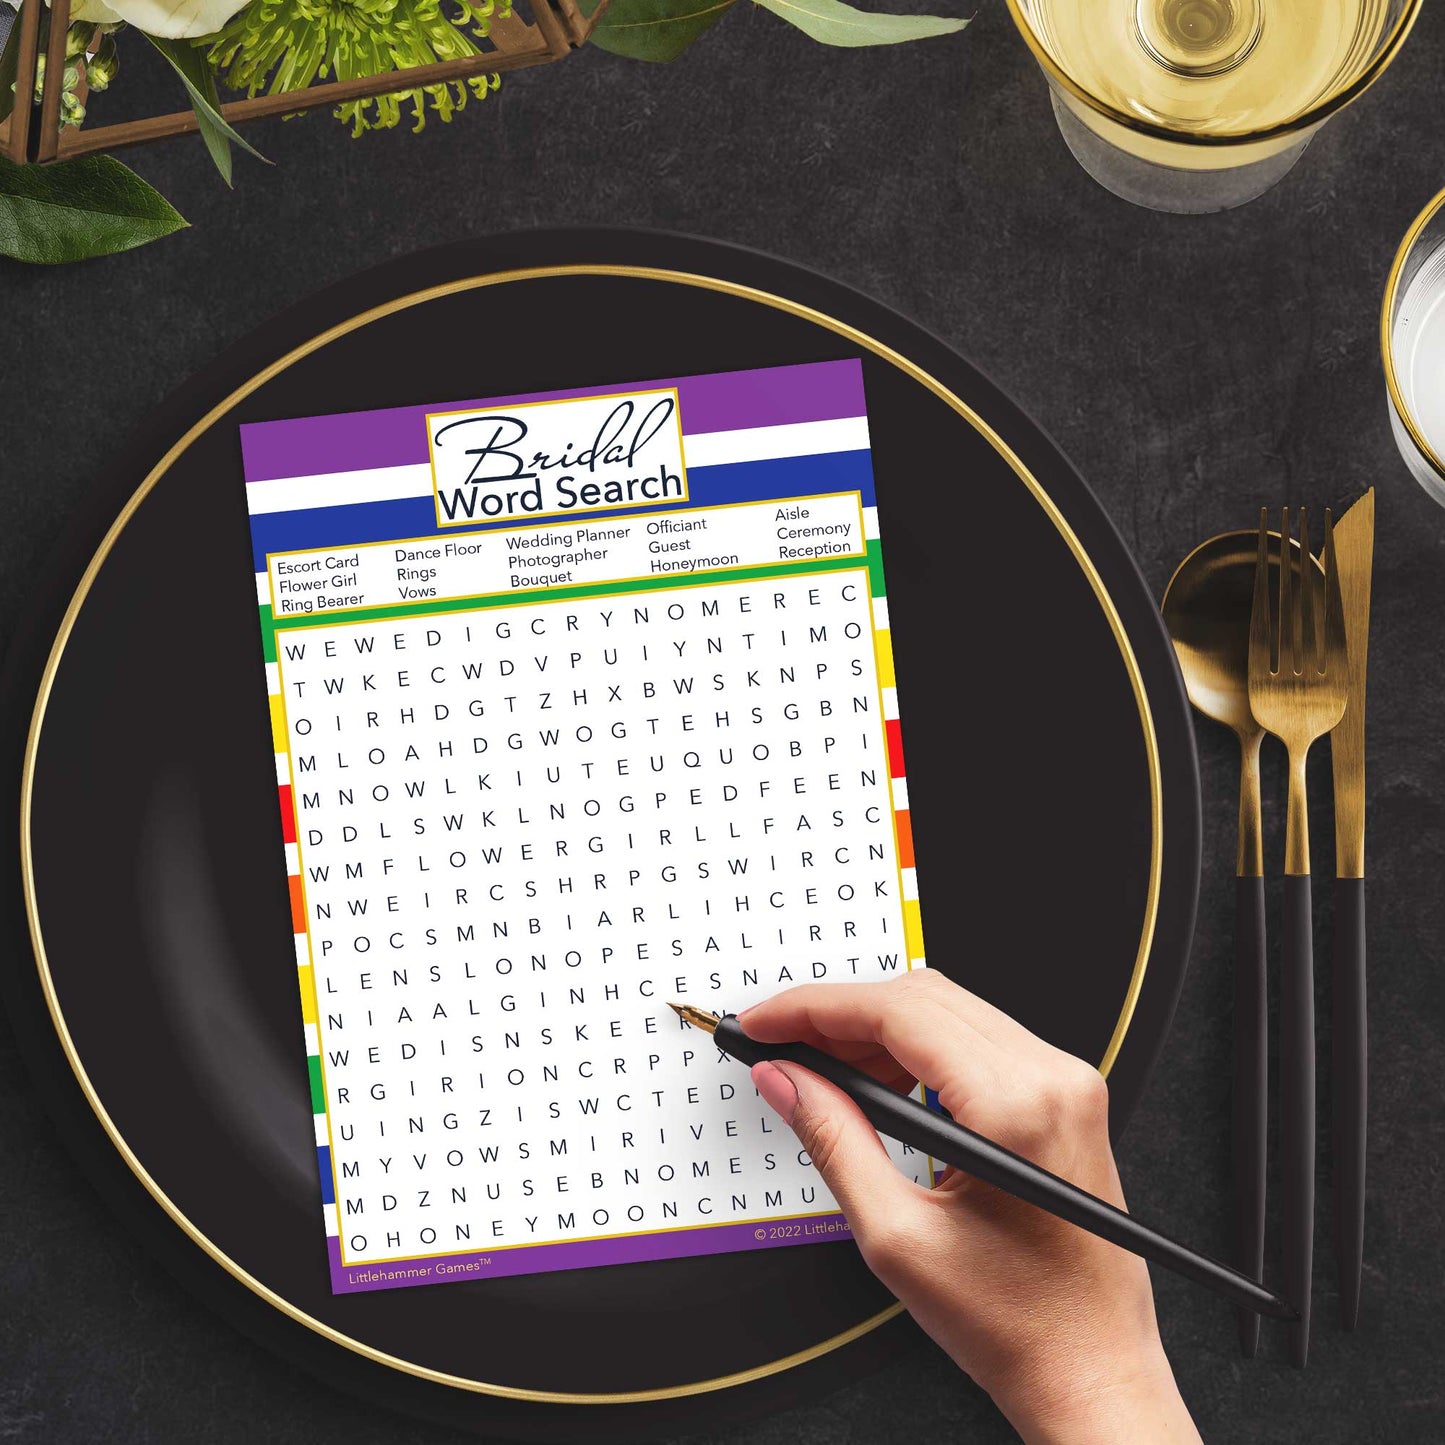 Woman with a pen playing a rainbow-striped Bridal Word Search game card at a dark place setting